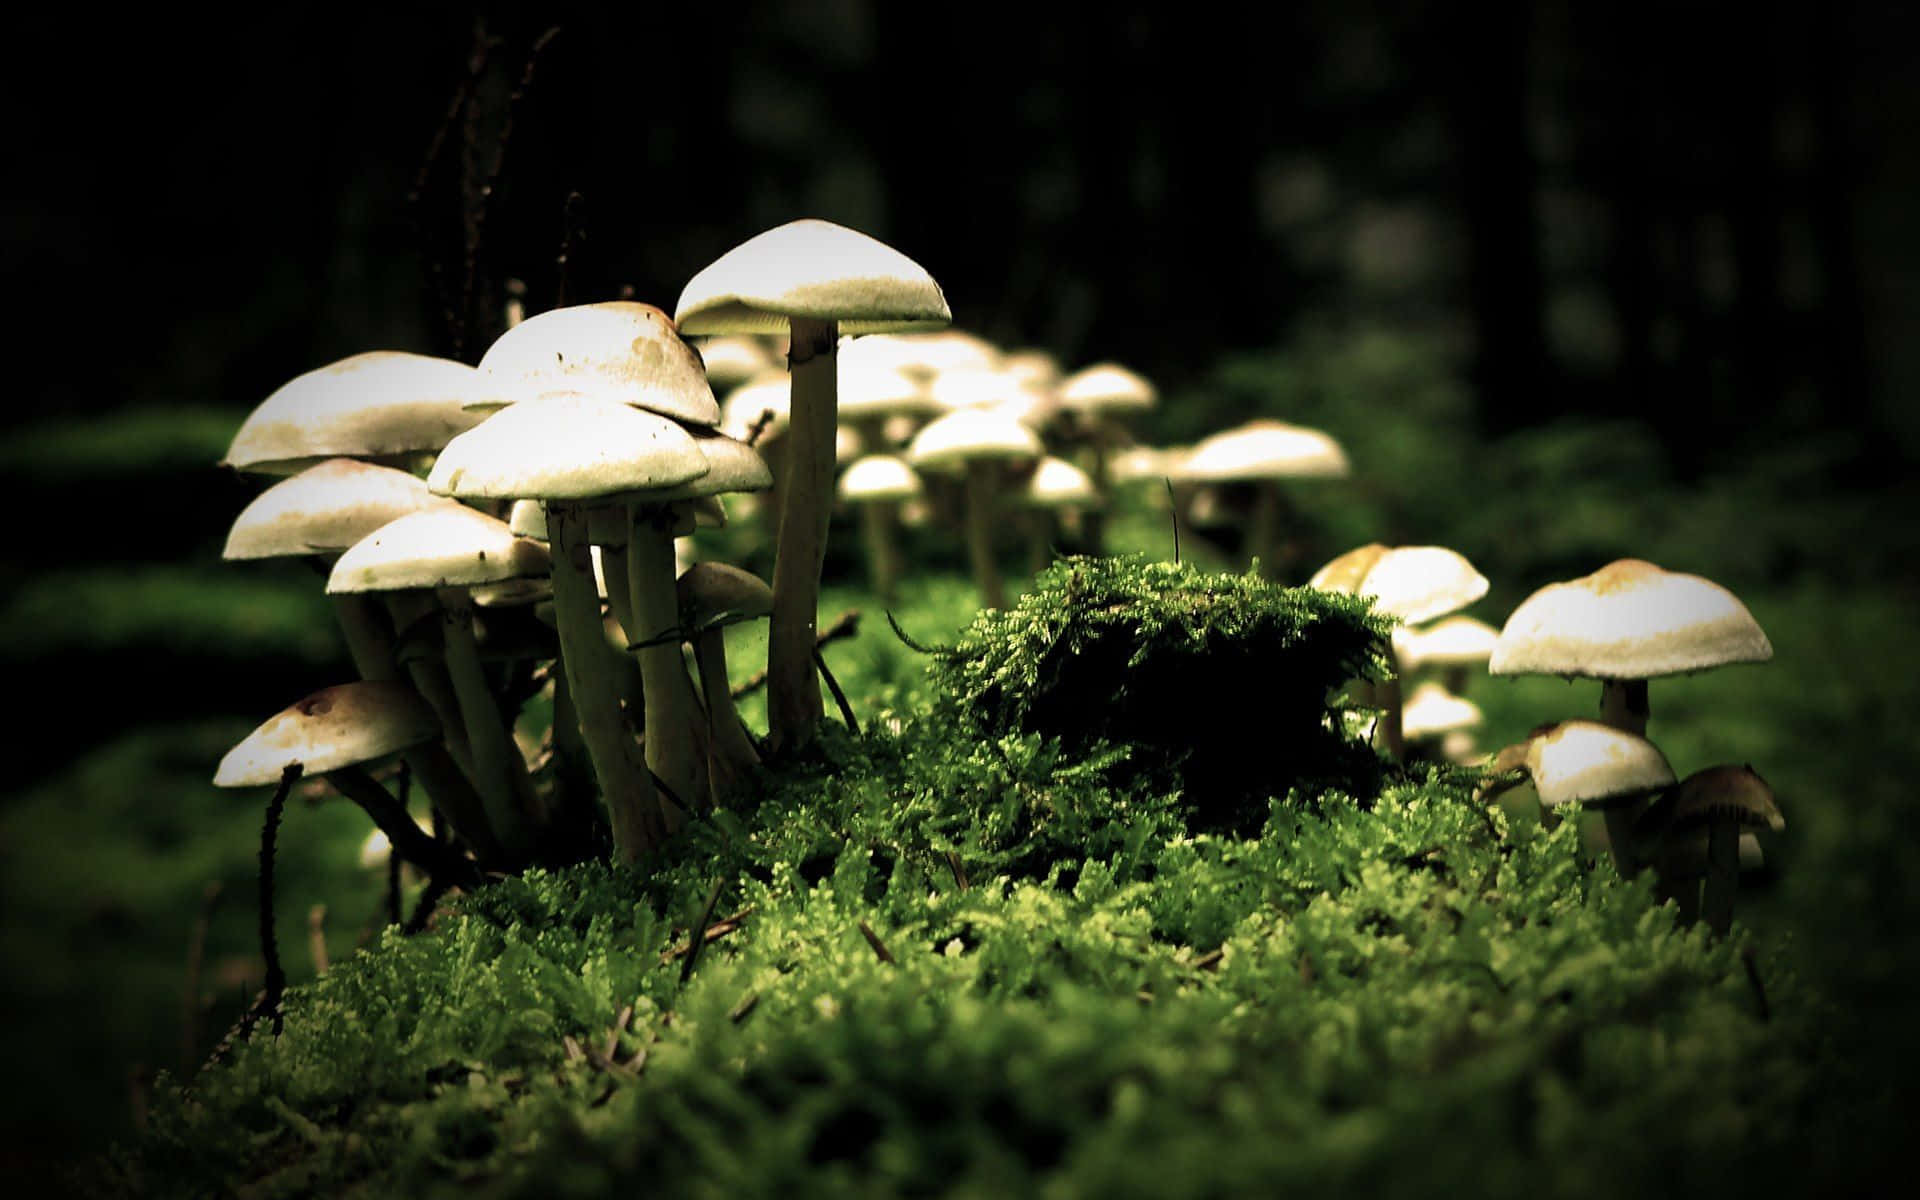 Dig into the depths of the forest to uncover beautiful mushrooms